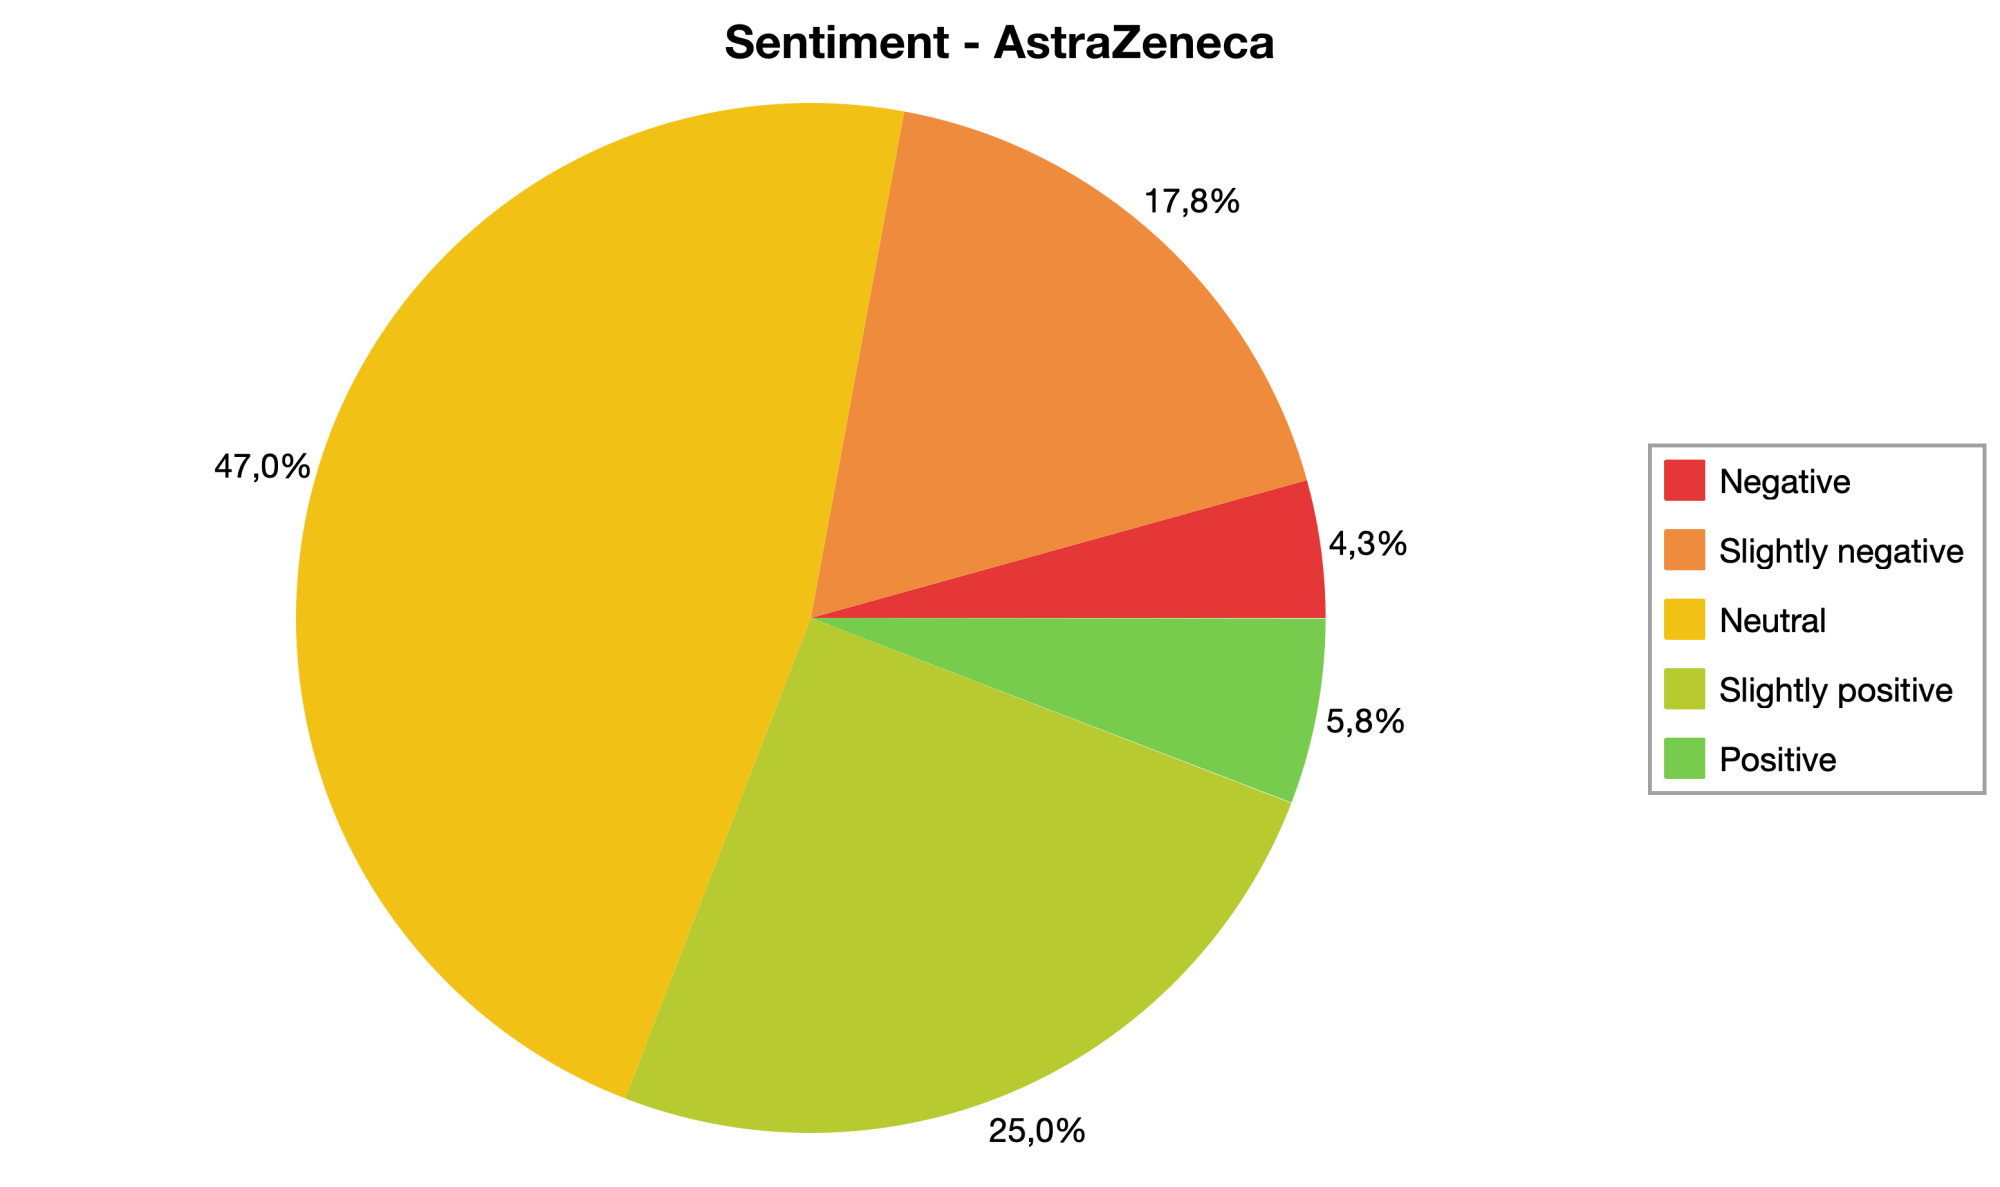 Pie chart showing the distribution of sentiment labels for the AstraZeneca data set.